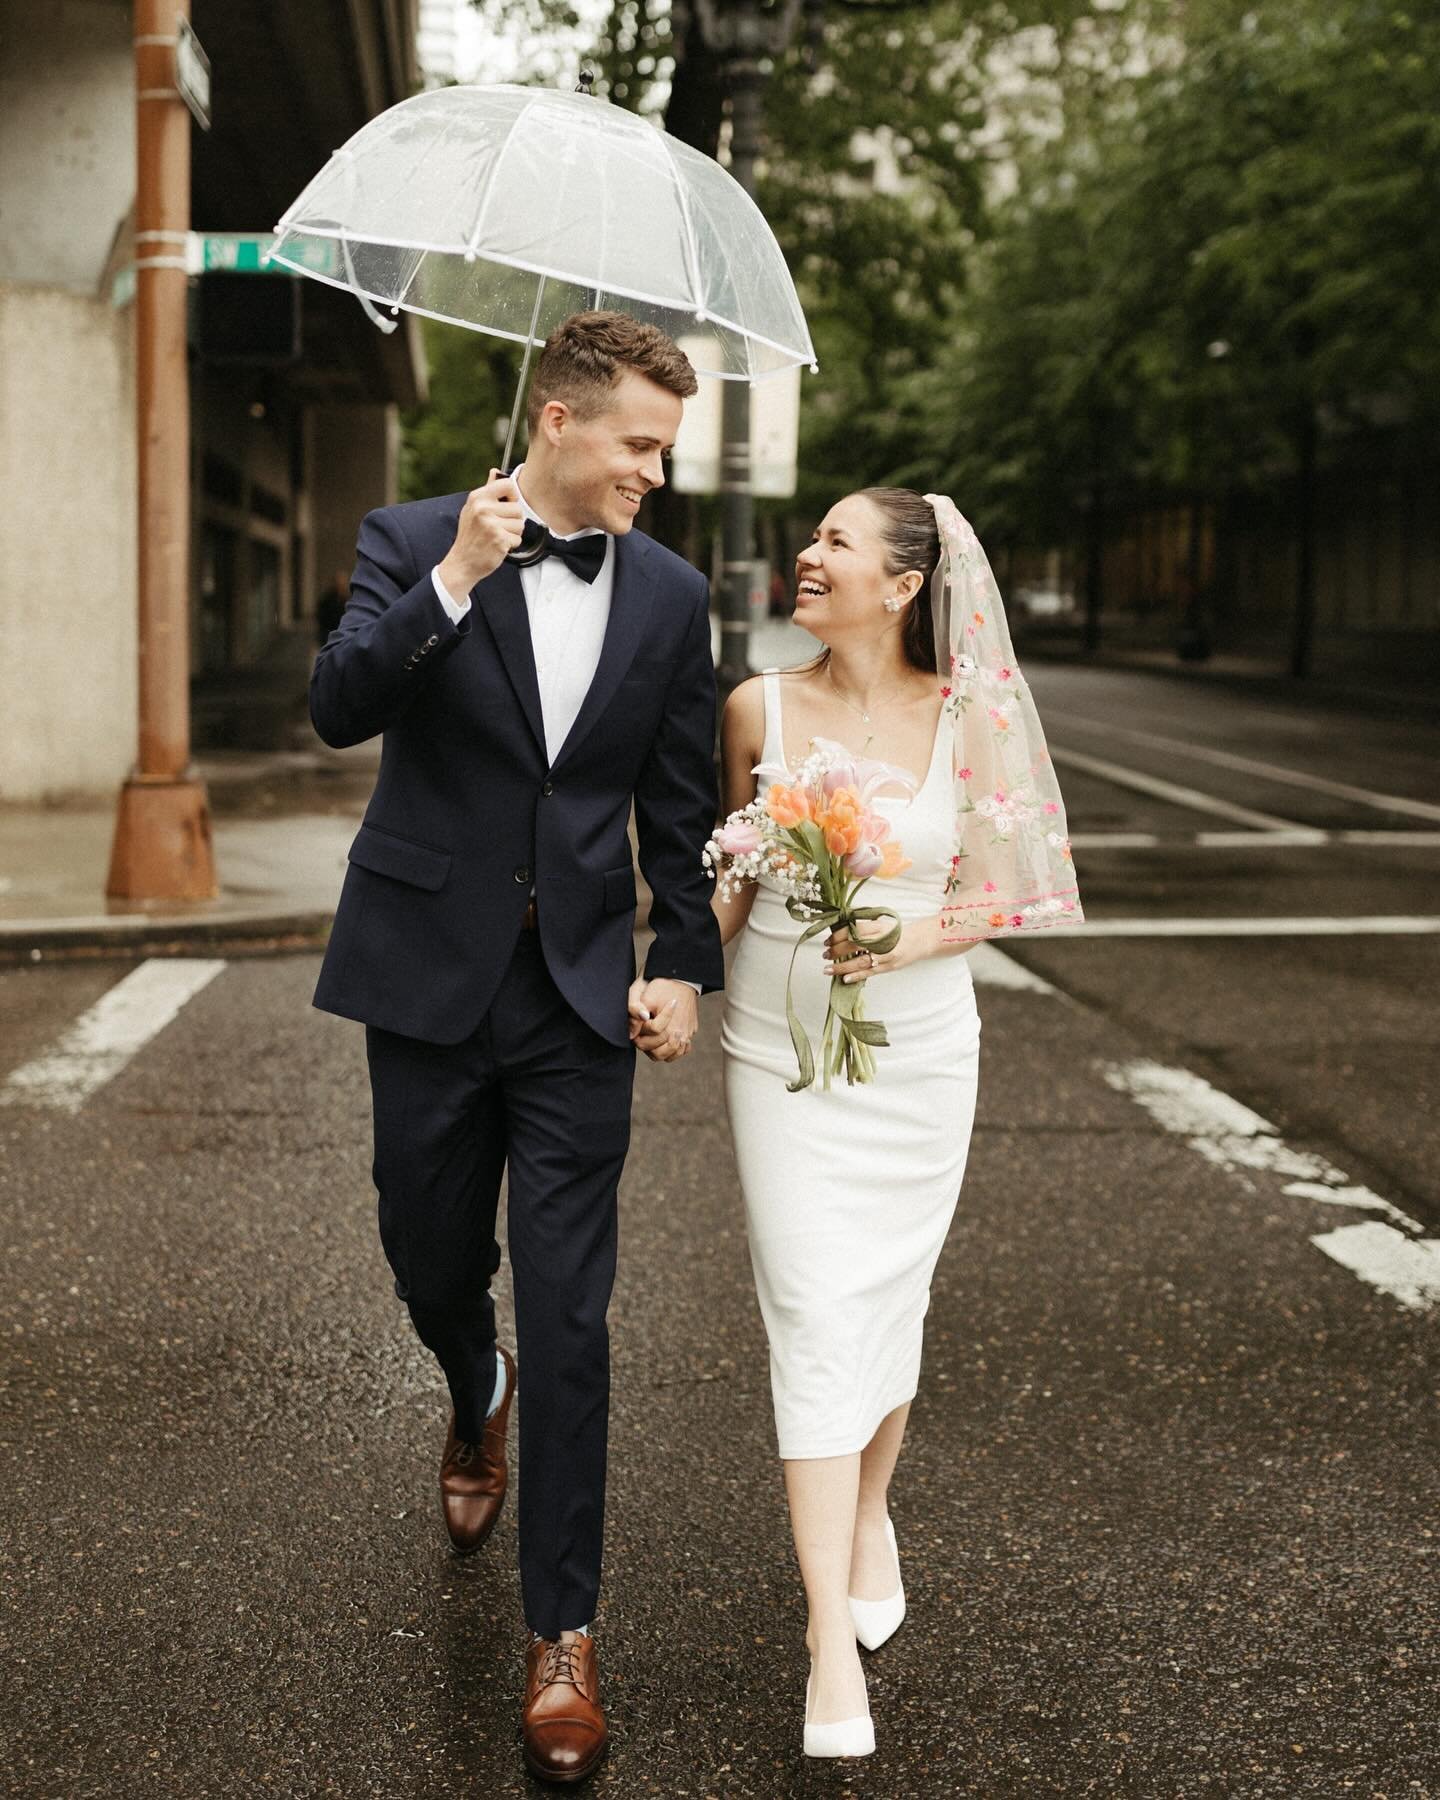 🎶 Going to the courthouse and we&rsquo;re, gonna get married 🎶 Part 1 of the sweetest elopement! Renee and Chris&rsquo; day was filled with so much joy and intention, and they made the most of the rainy weather. The most important part of your wedd